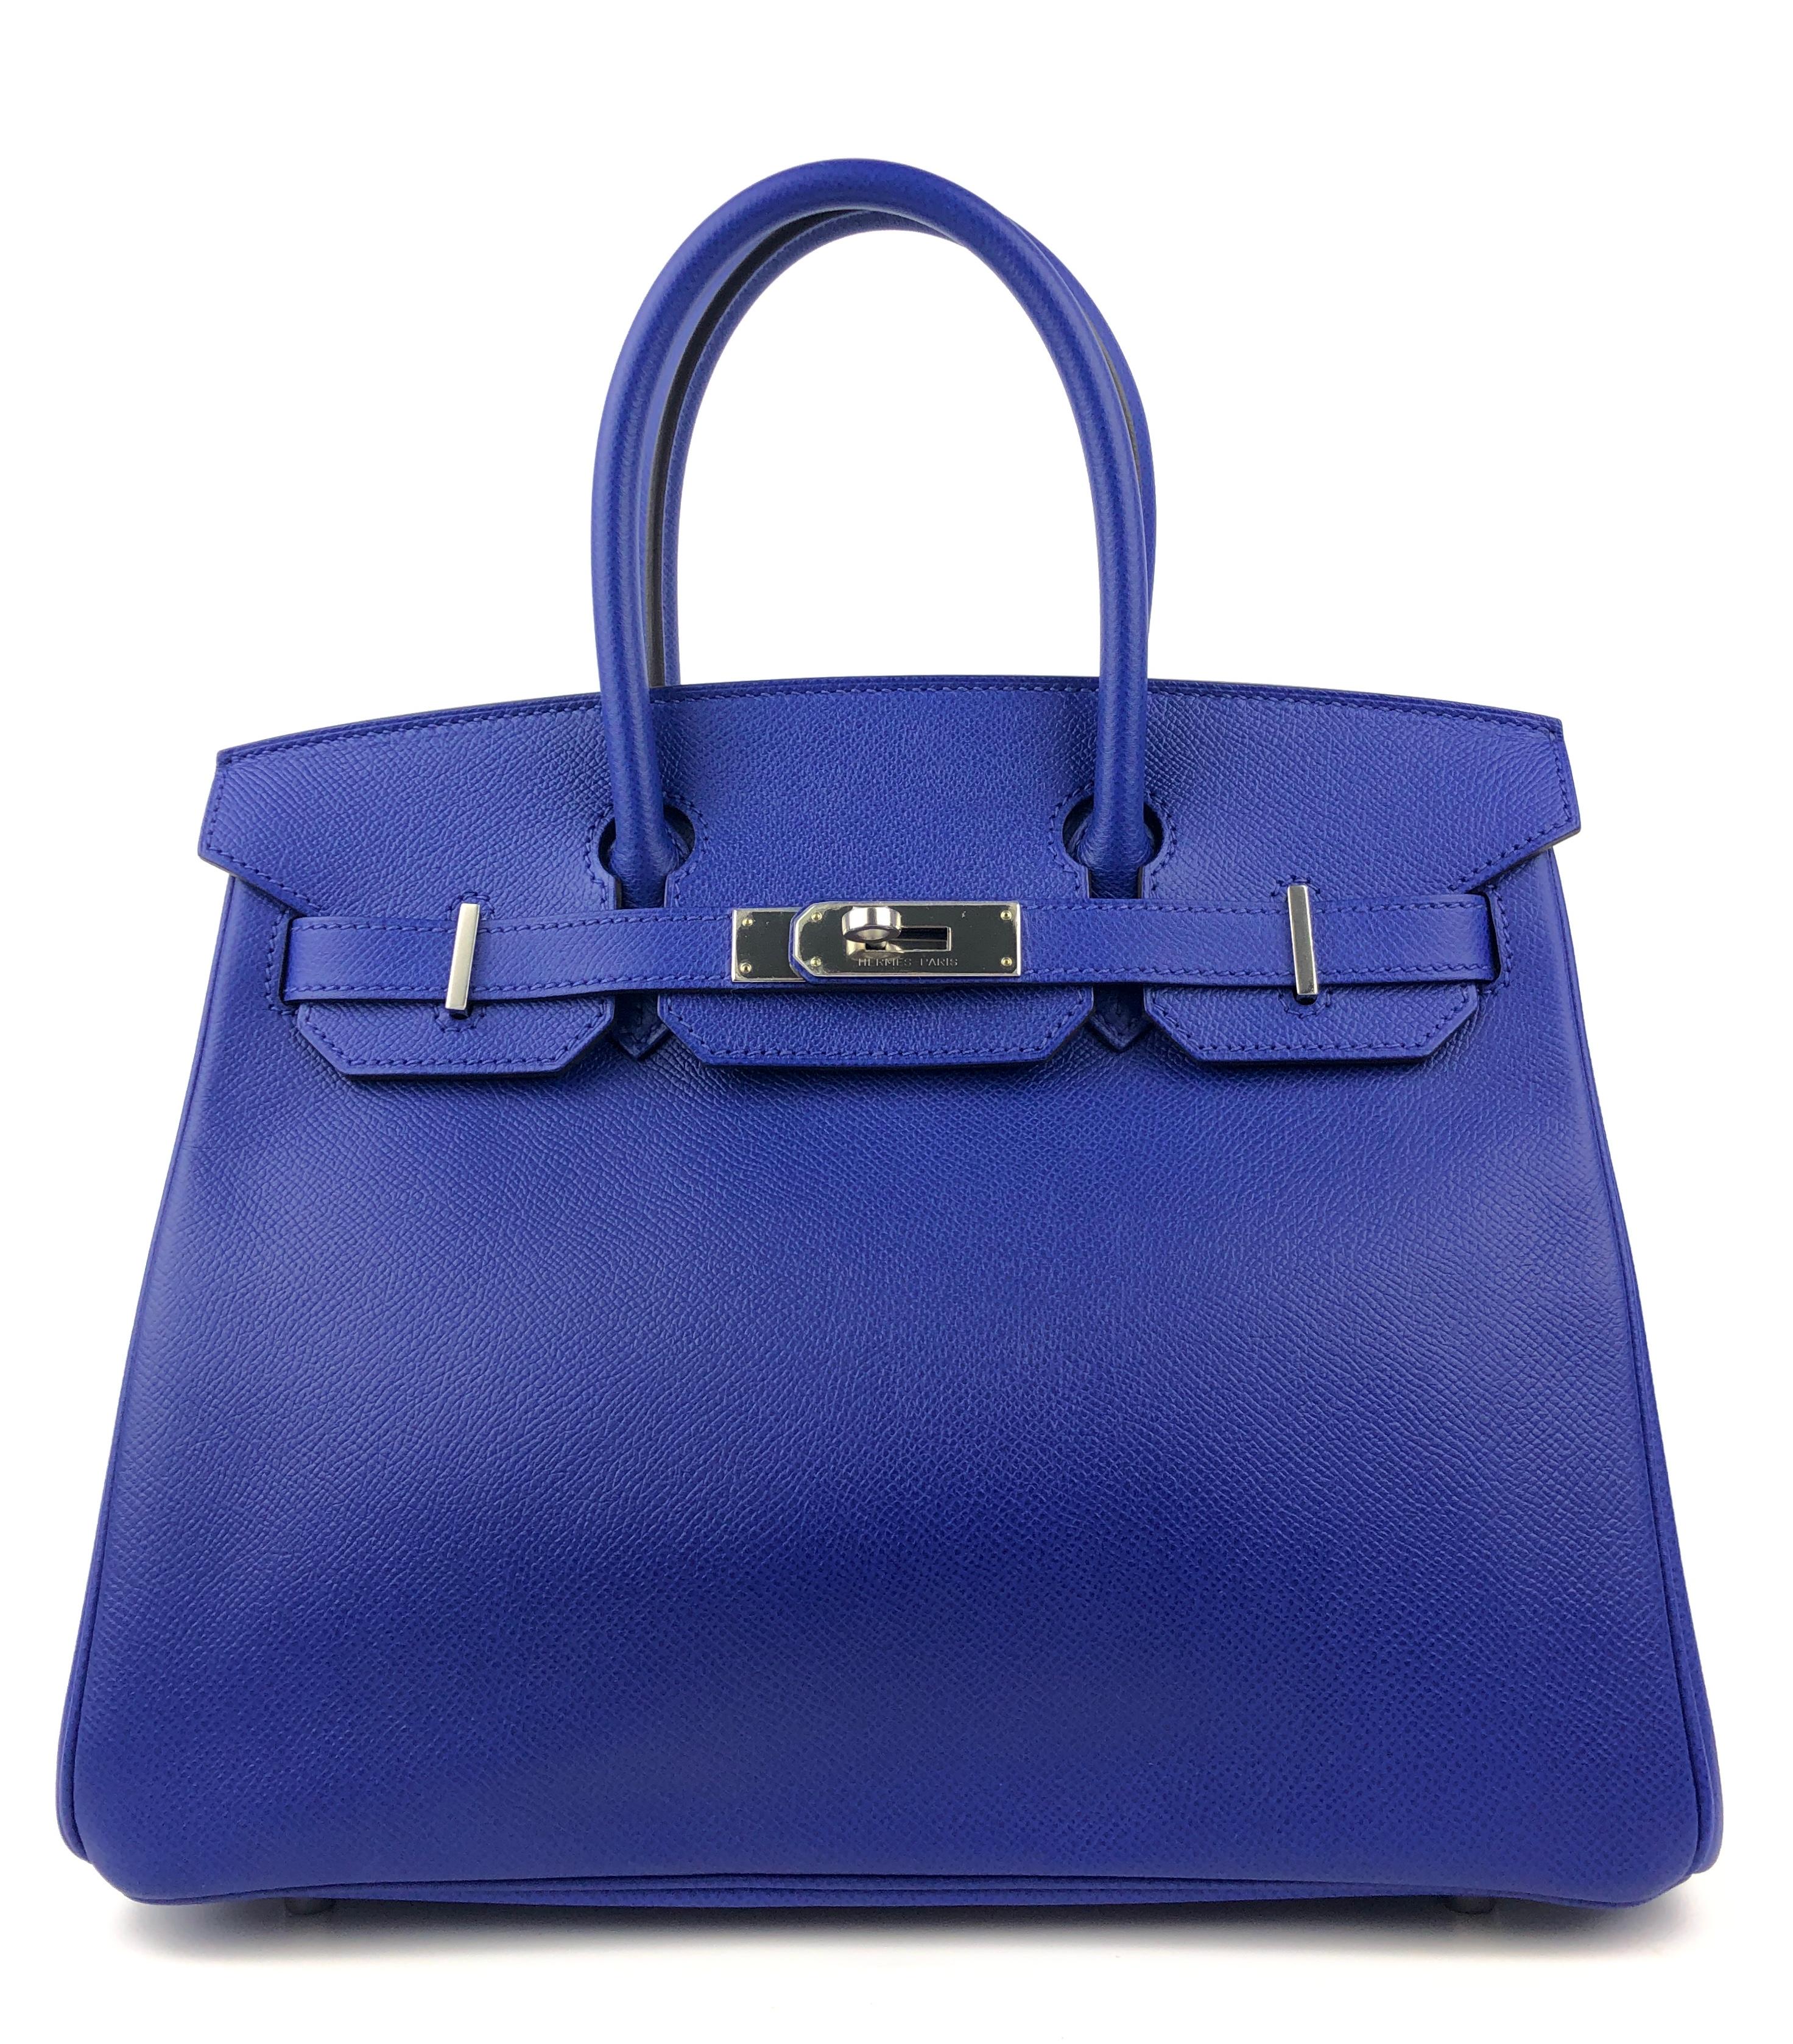 Stunning Hermes Birkin 30 Blue Electric Epsom Palladium Hardware.  Pristine Almost Like New Condition, Plastic on Hardware and Feet, Excellent corners and Structure. R Stamp 2014.

Shop with Confidence from Lux Addicts. Authenticity Guaranteed!